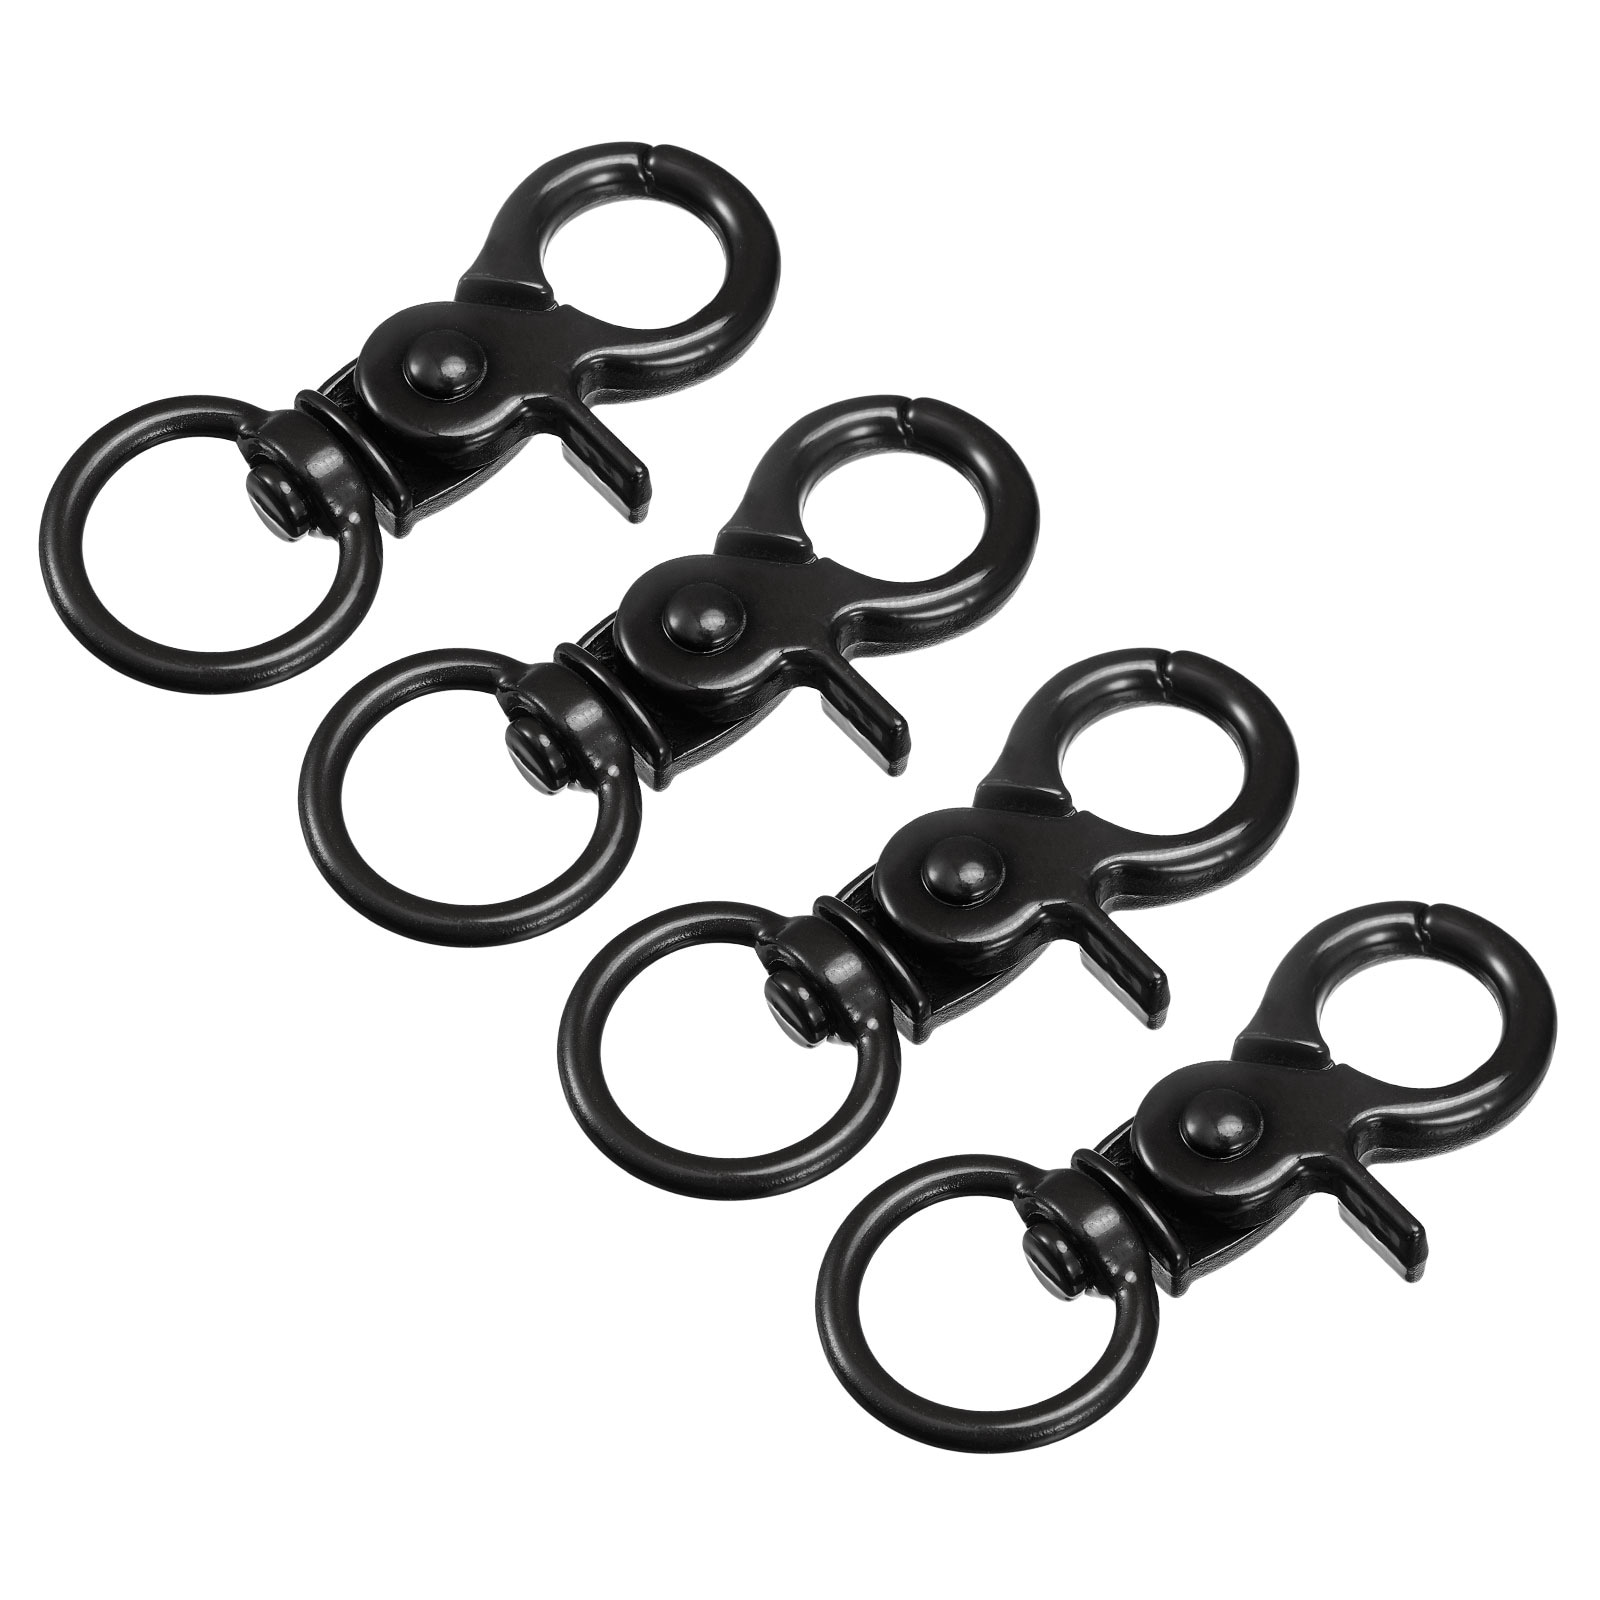 https://ak1.ostkcdn.com/images/products/is/images/direct/1c917770fdf117592008129be66169e861fbd838/44mm-Swivel-Clasps-Lanyard-Snap-Hook-Claw-Clasp-for-DIY-Black%2C-4Pcs.jpg